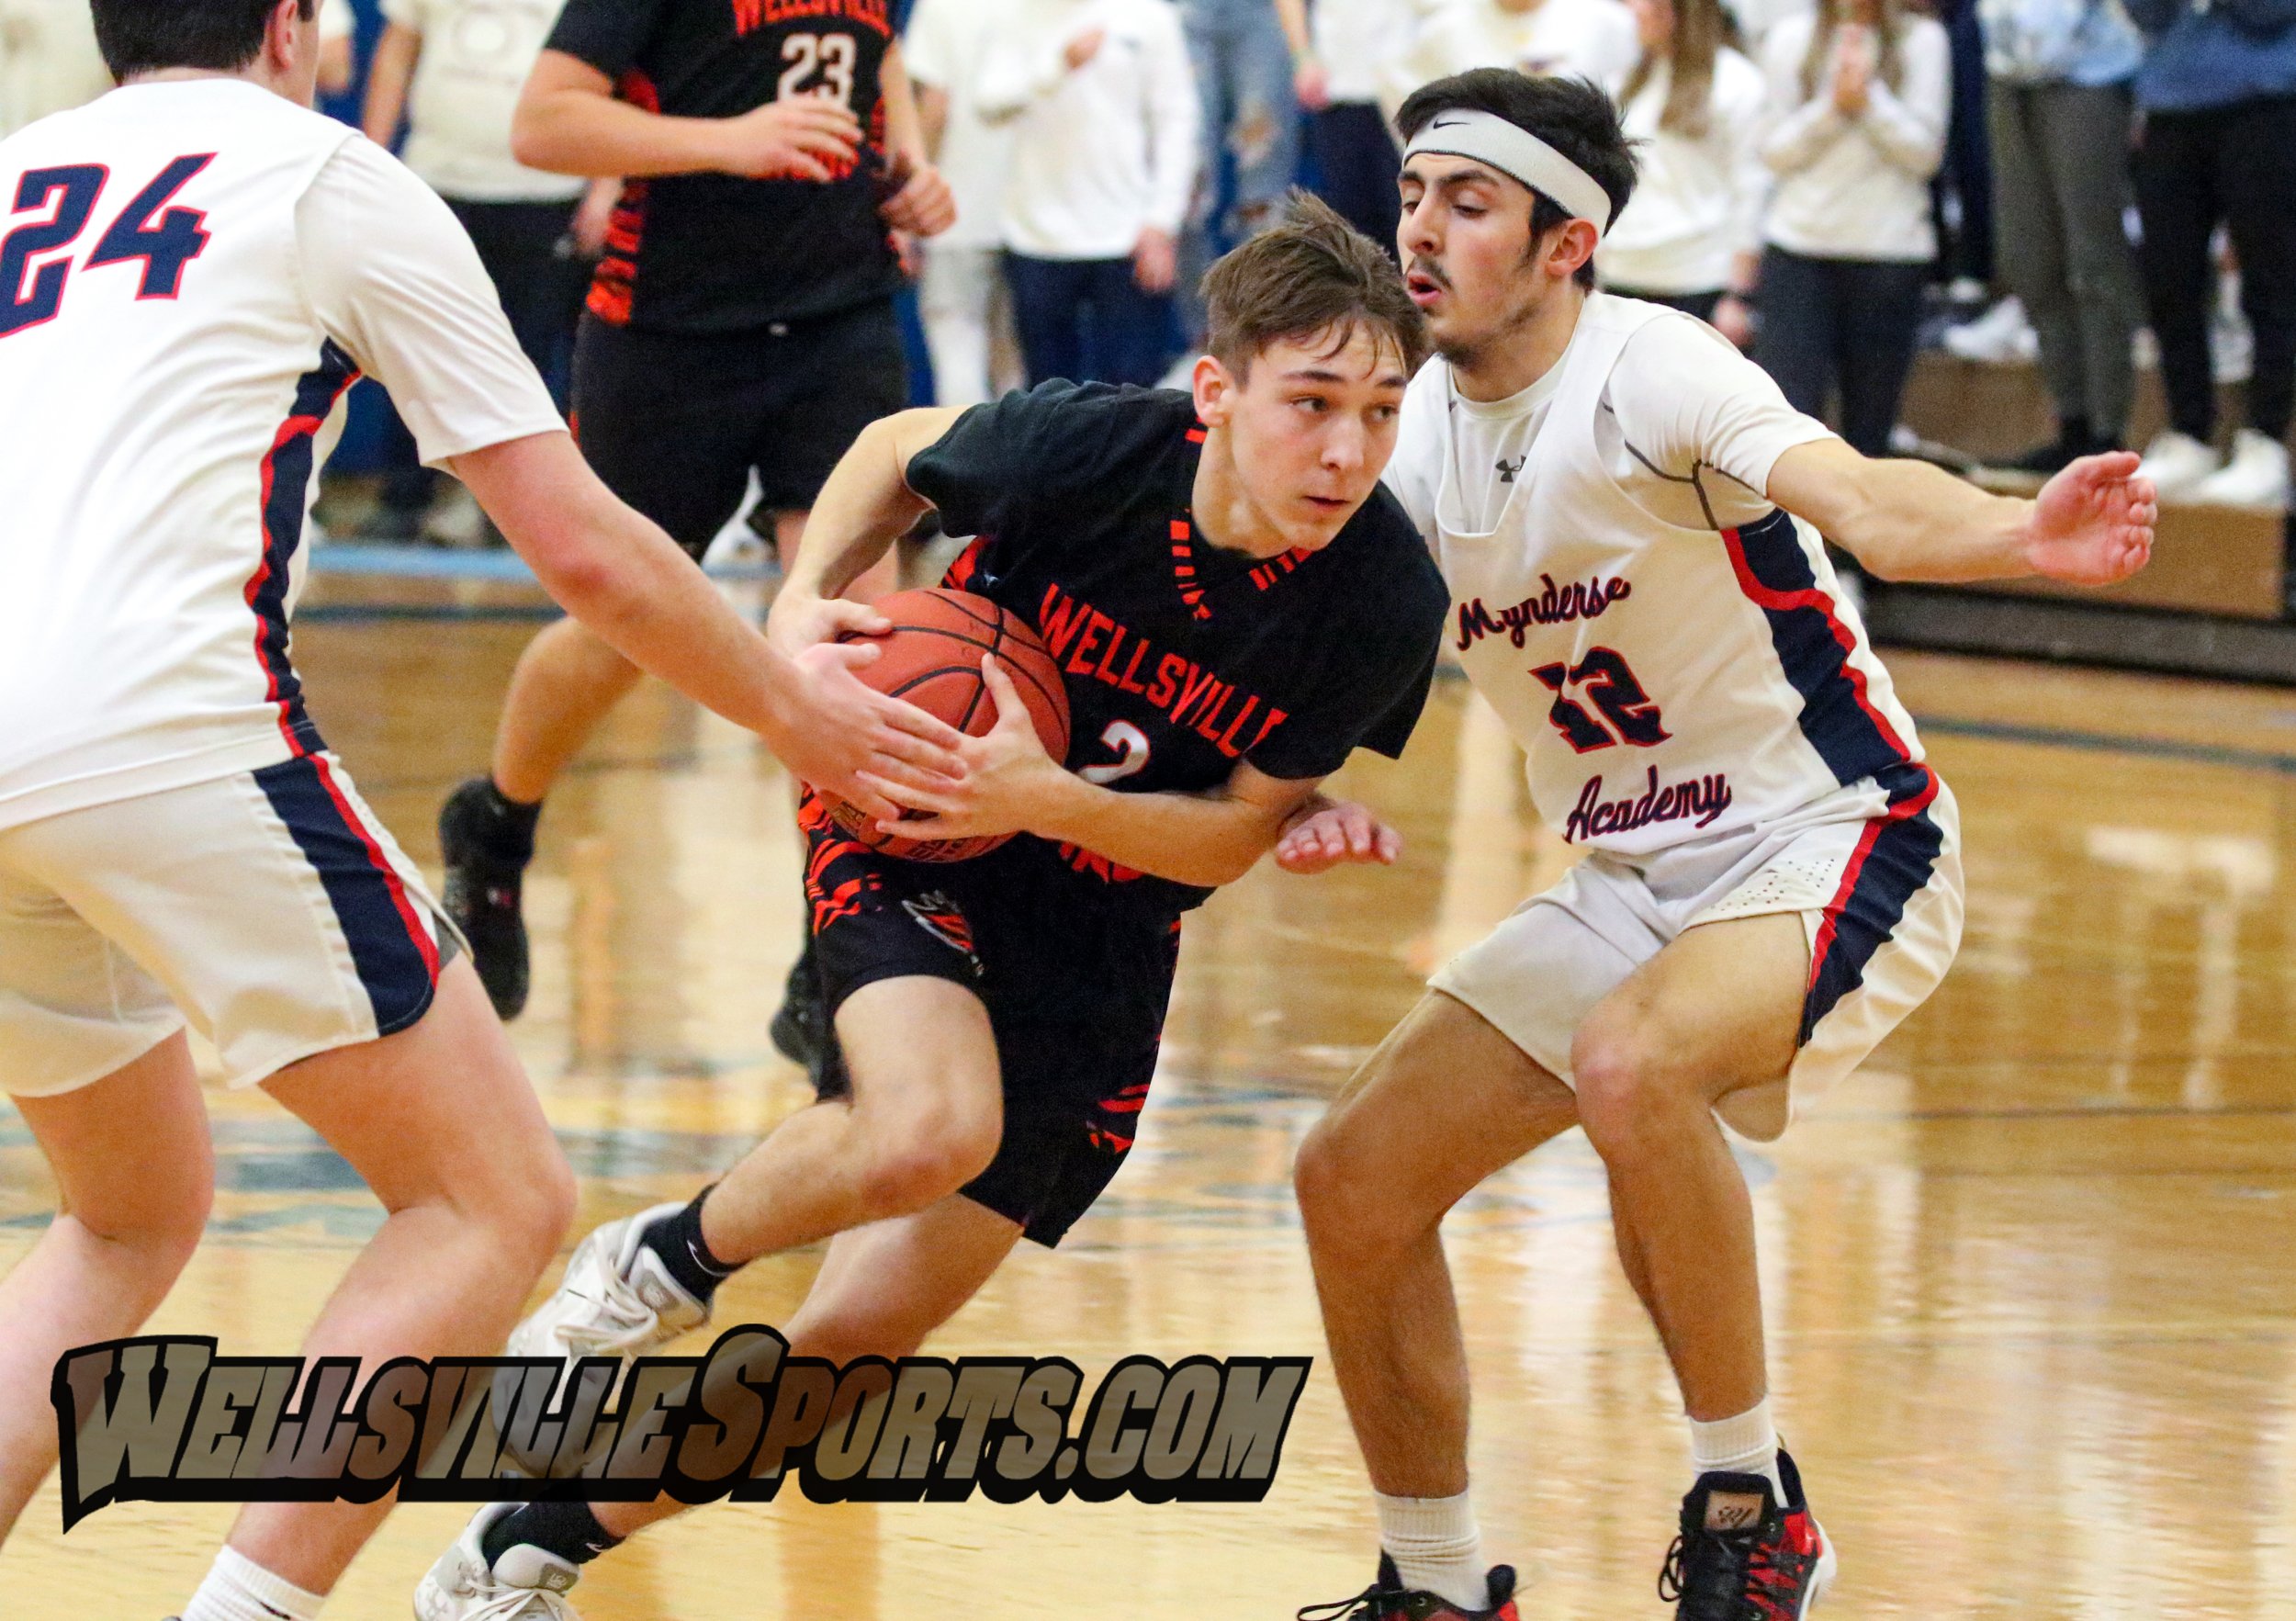  Wellsville junior Cody Costello (2) drives toward the basket, splitting the Mynderse defense on his way in on the attack, during Saturday afternoon’s Class B2 Finals in Webster. [Chris Brooks/WellsvilleSports.com] 